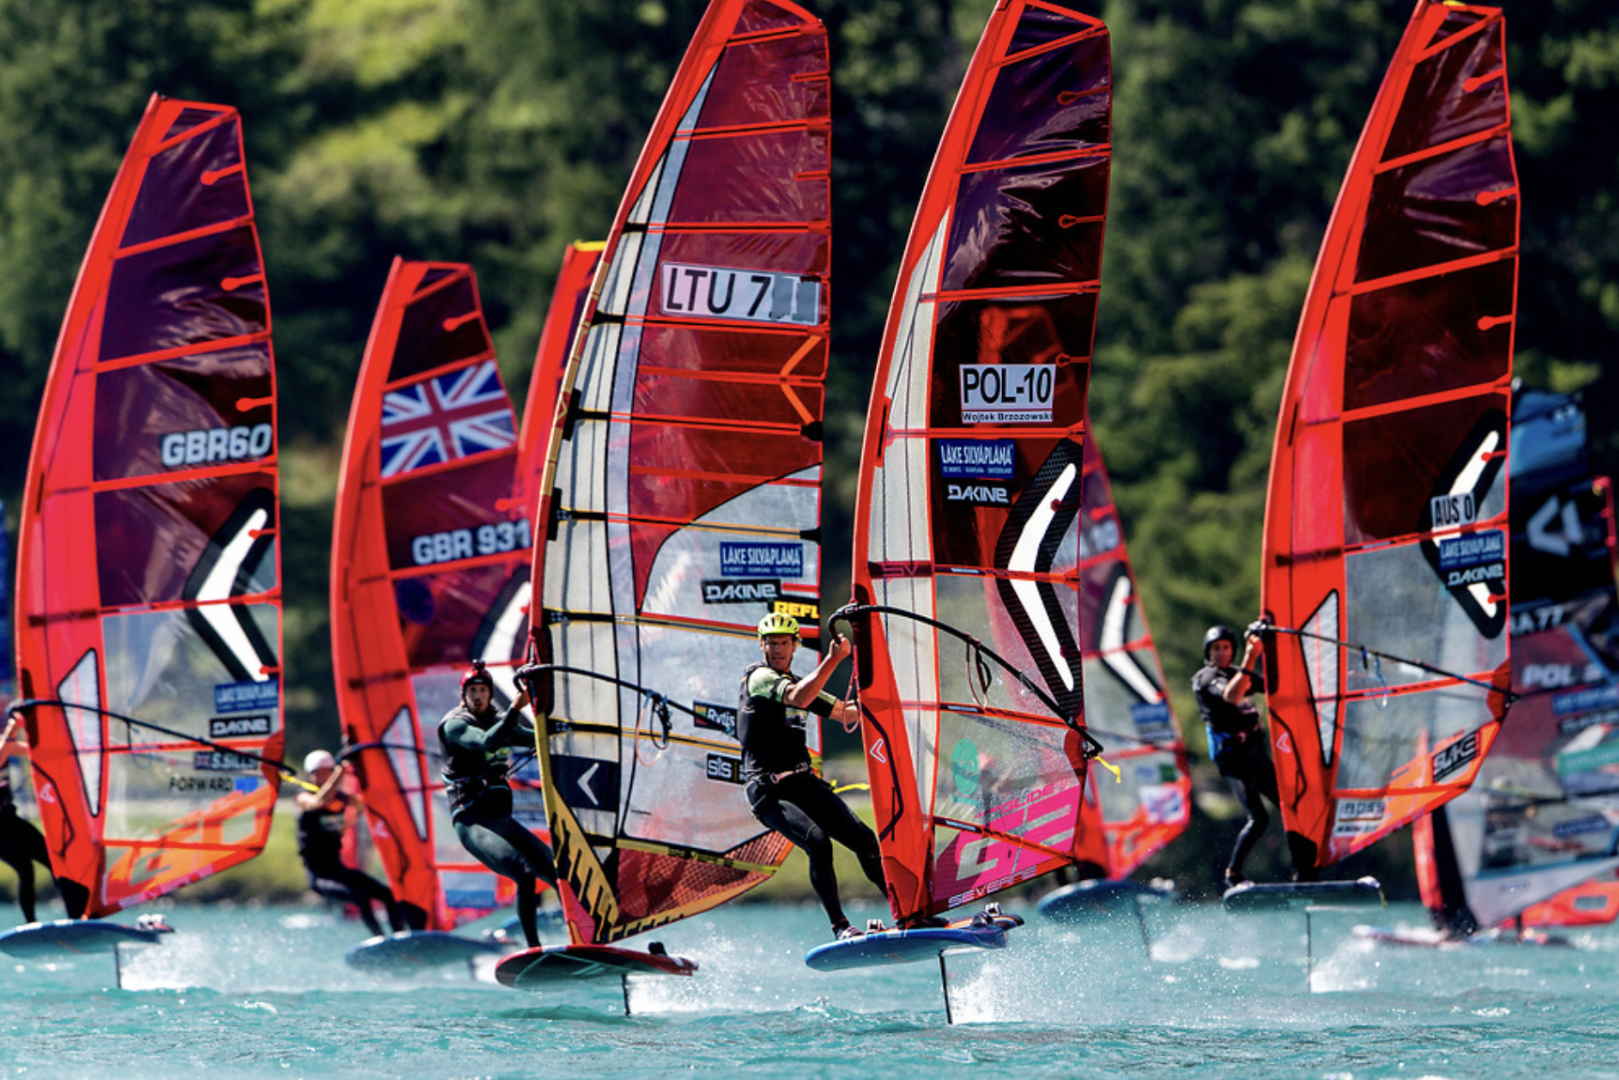 This year it's Foil Mania on Lake Silvaplana in the Engadin